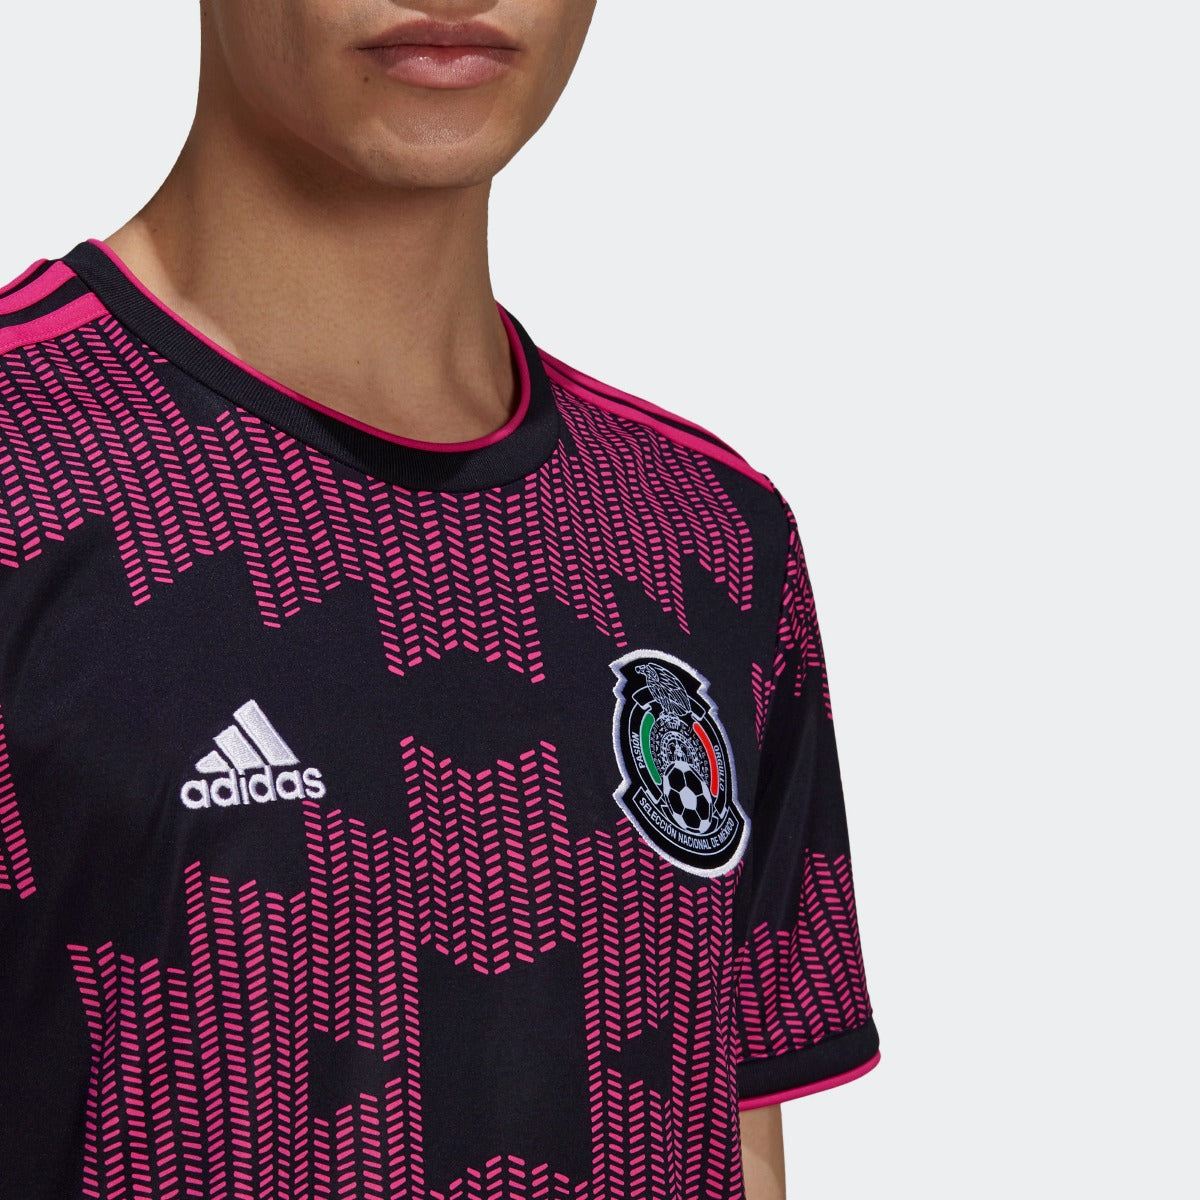 Adidas 2021-2022 Mexico Home Jersey - Black-Real Magenta (Detail 1)